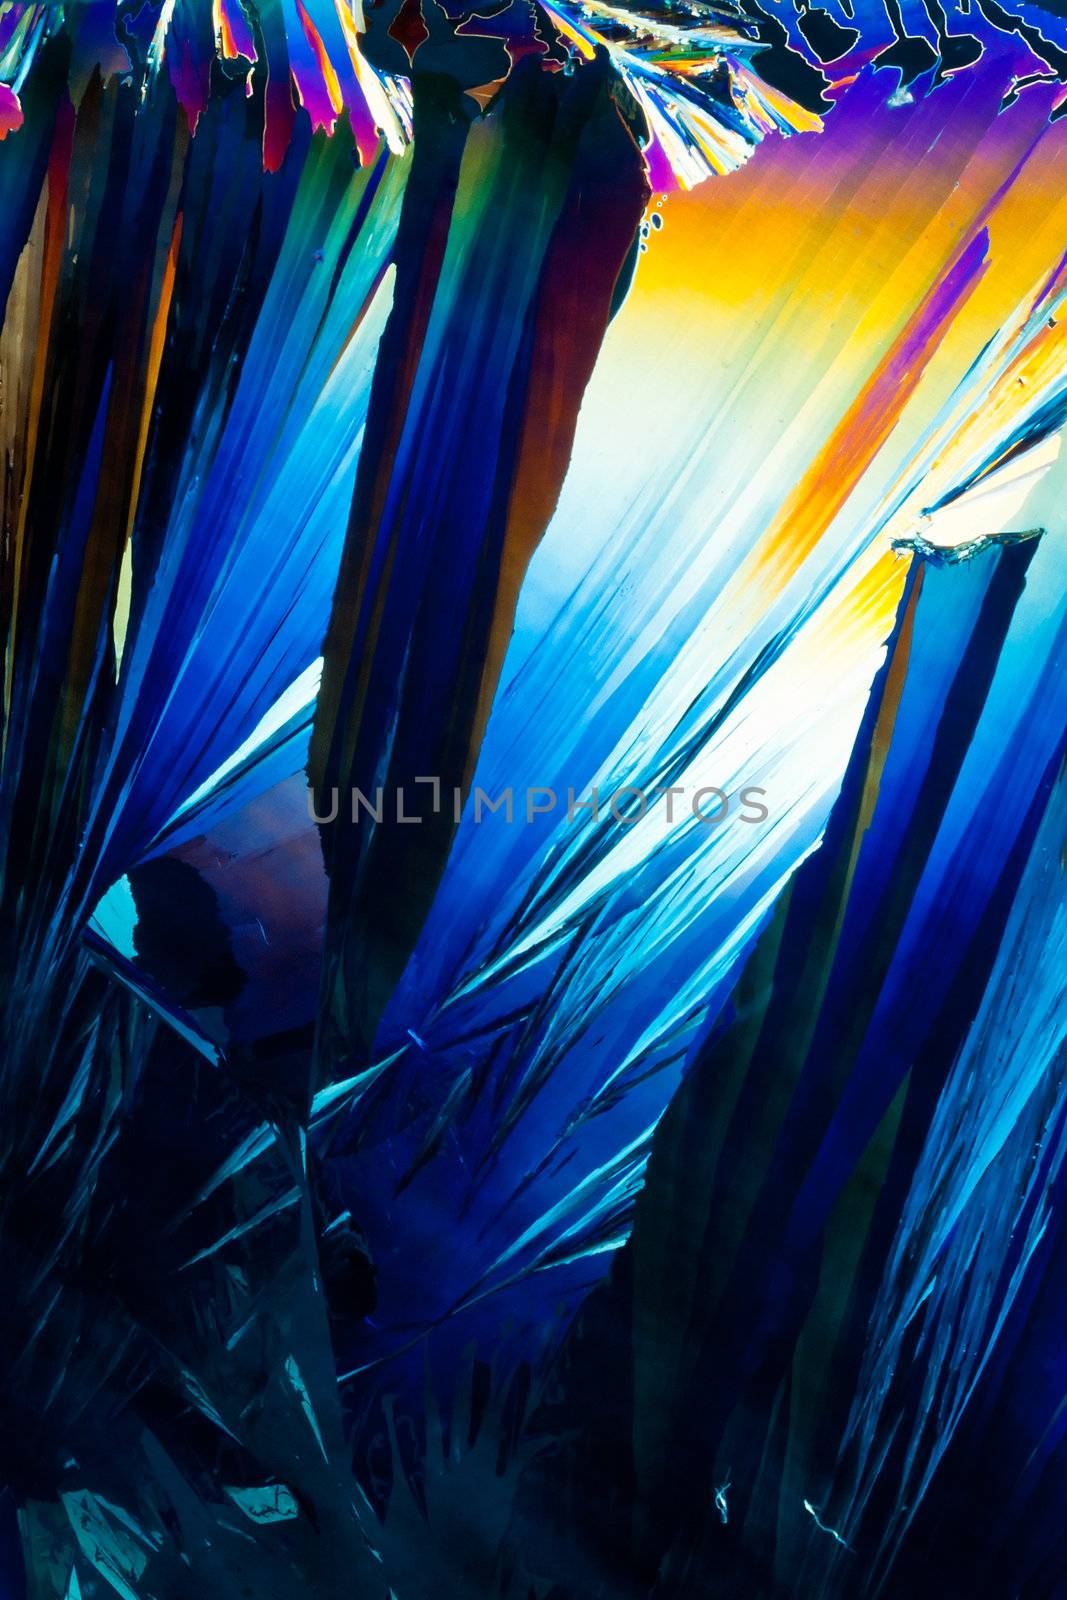 Salicylic acid crystals in polarized light by PiLens